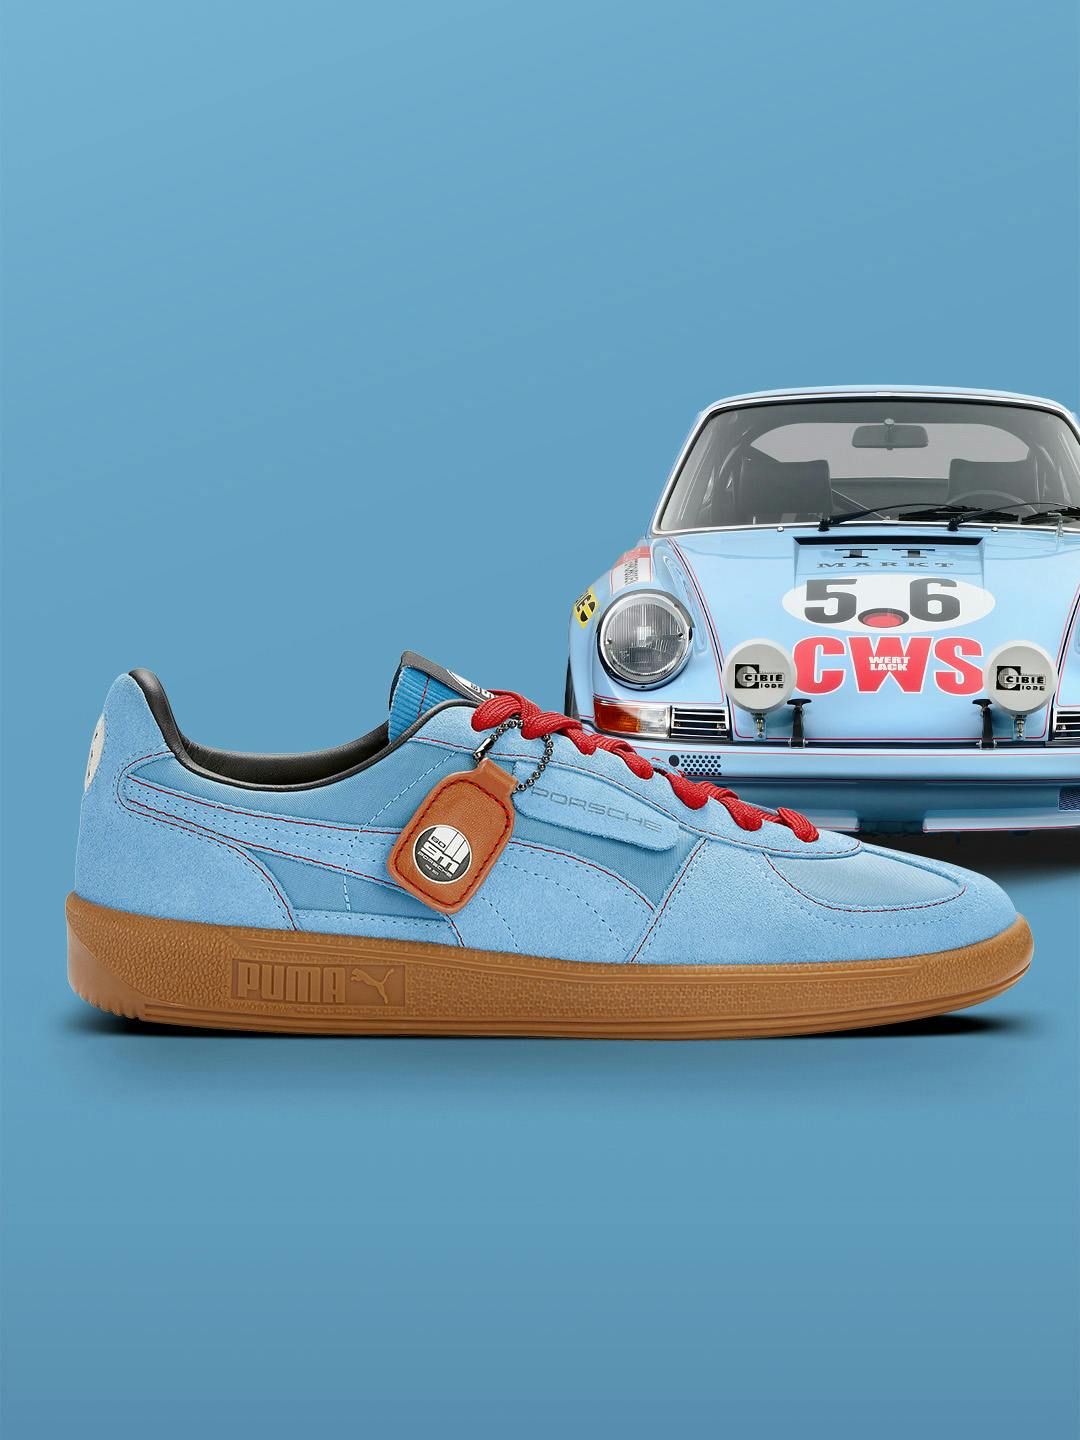 Pictured is a blue Puma sneaker on the side in cooperation with Porsche and in the background is a blue oldtimer with colourful embellishments from Porsche on the front. 